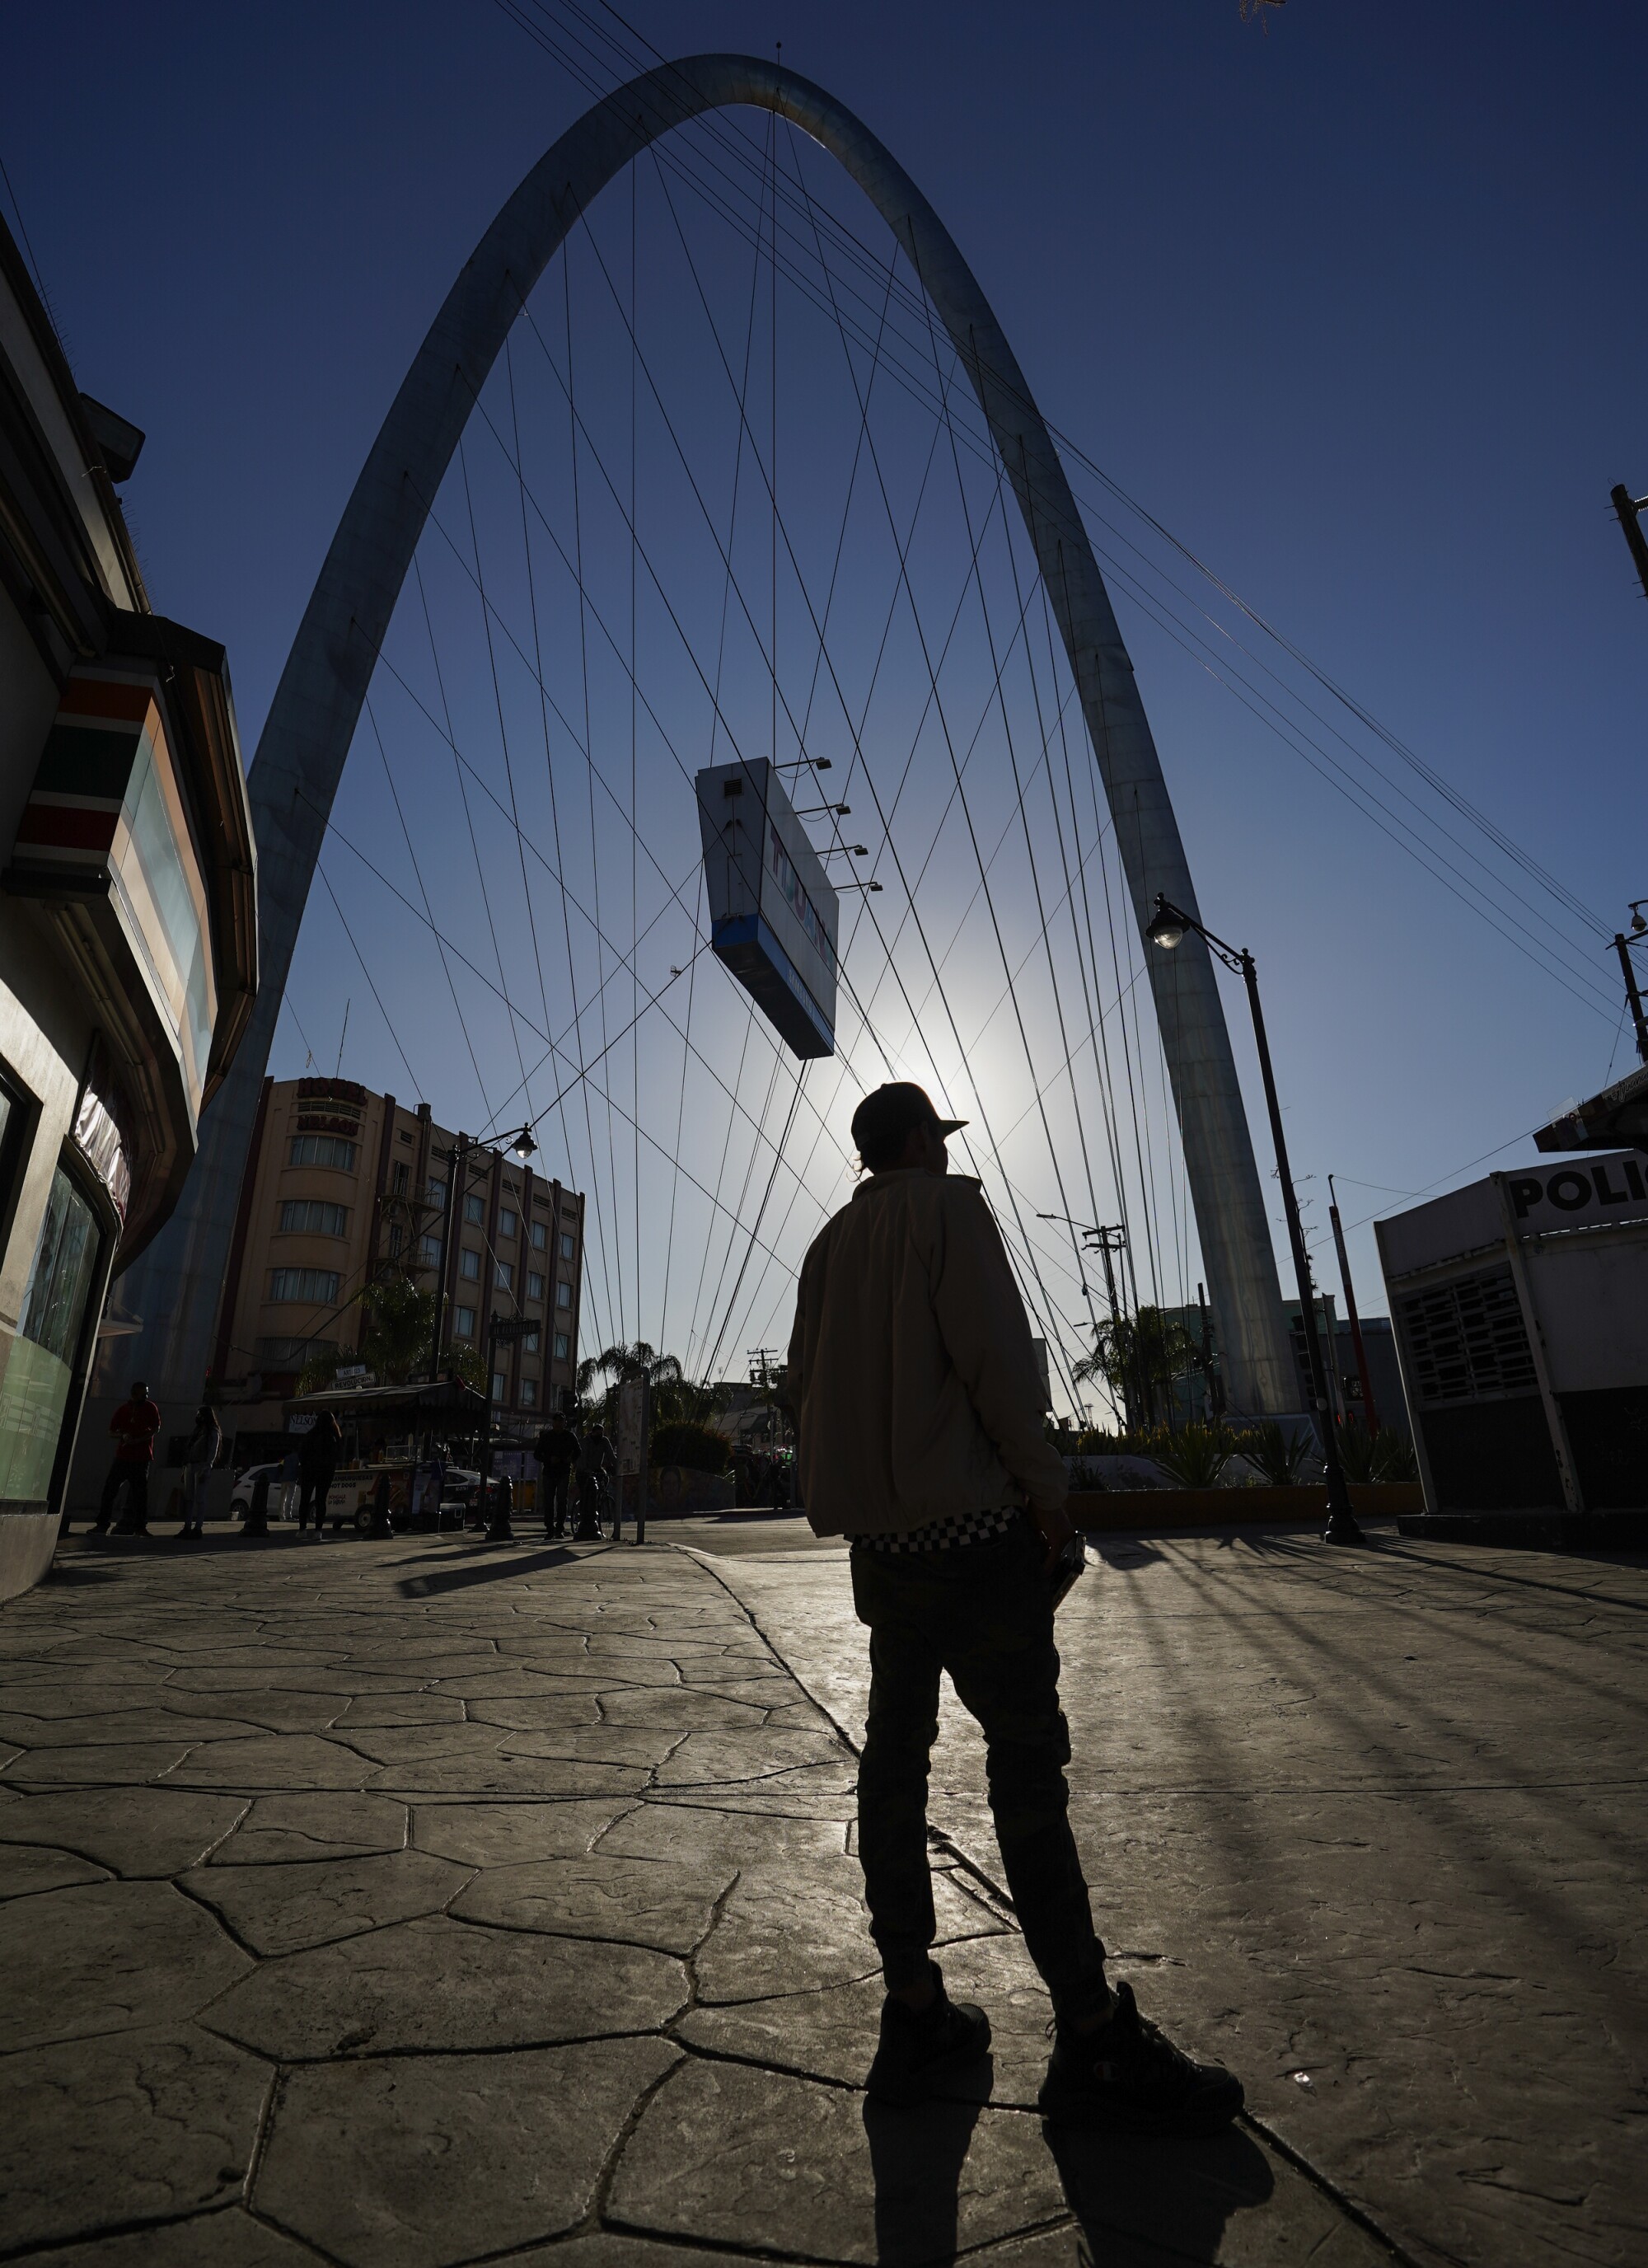 A man is silhouetted in front of Tijuana's famous arch